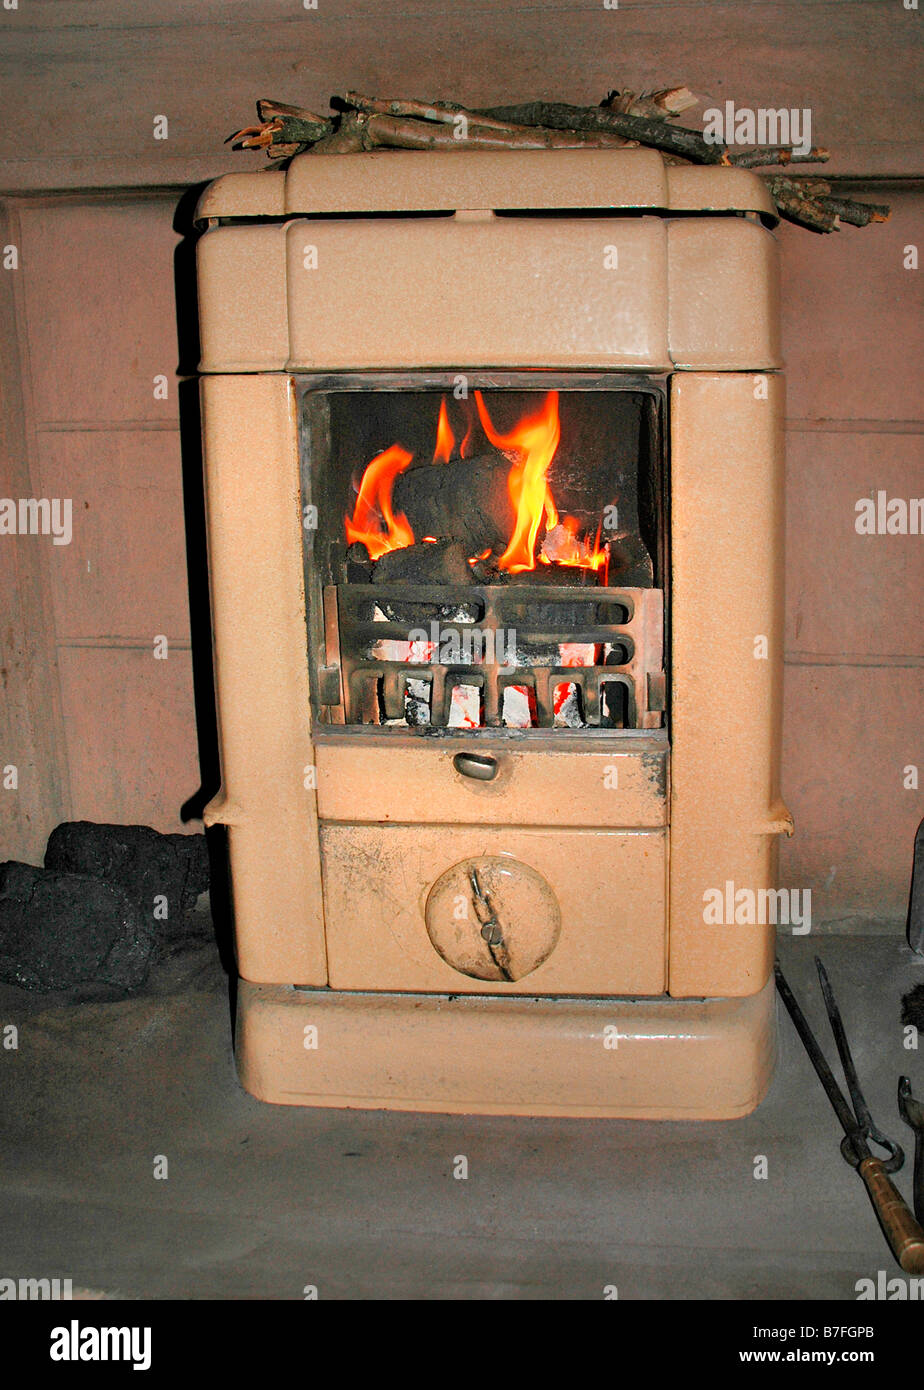 An old fashioned fireplace with kindling wood on top to dry. Stock Photo